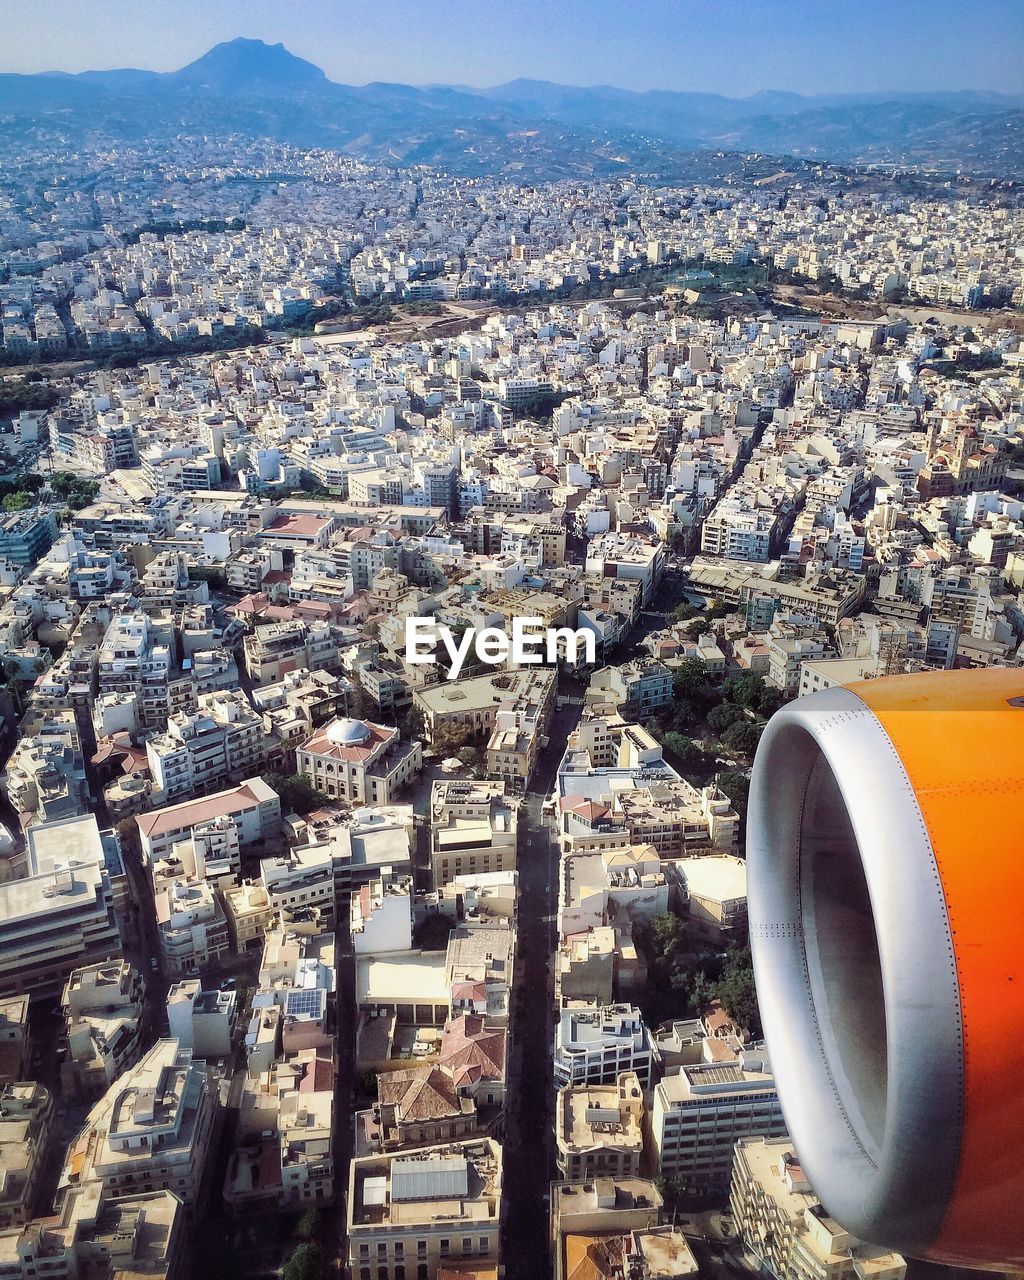 Cropped image of airplane over cityscape